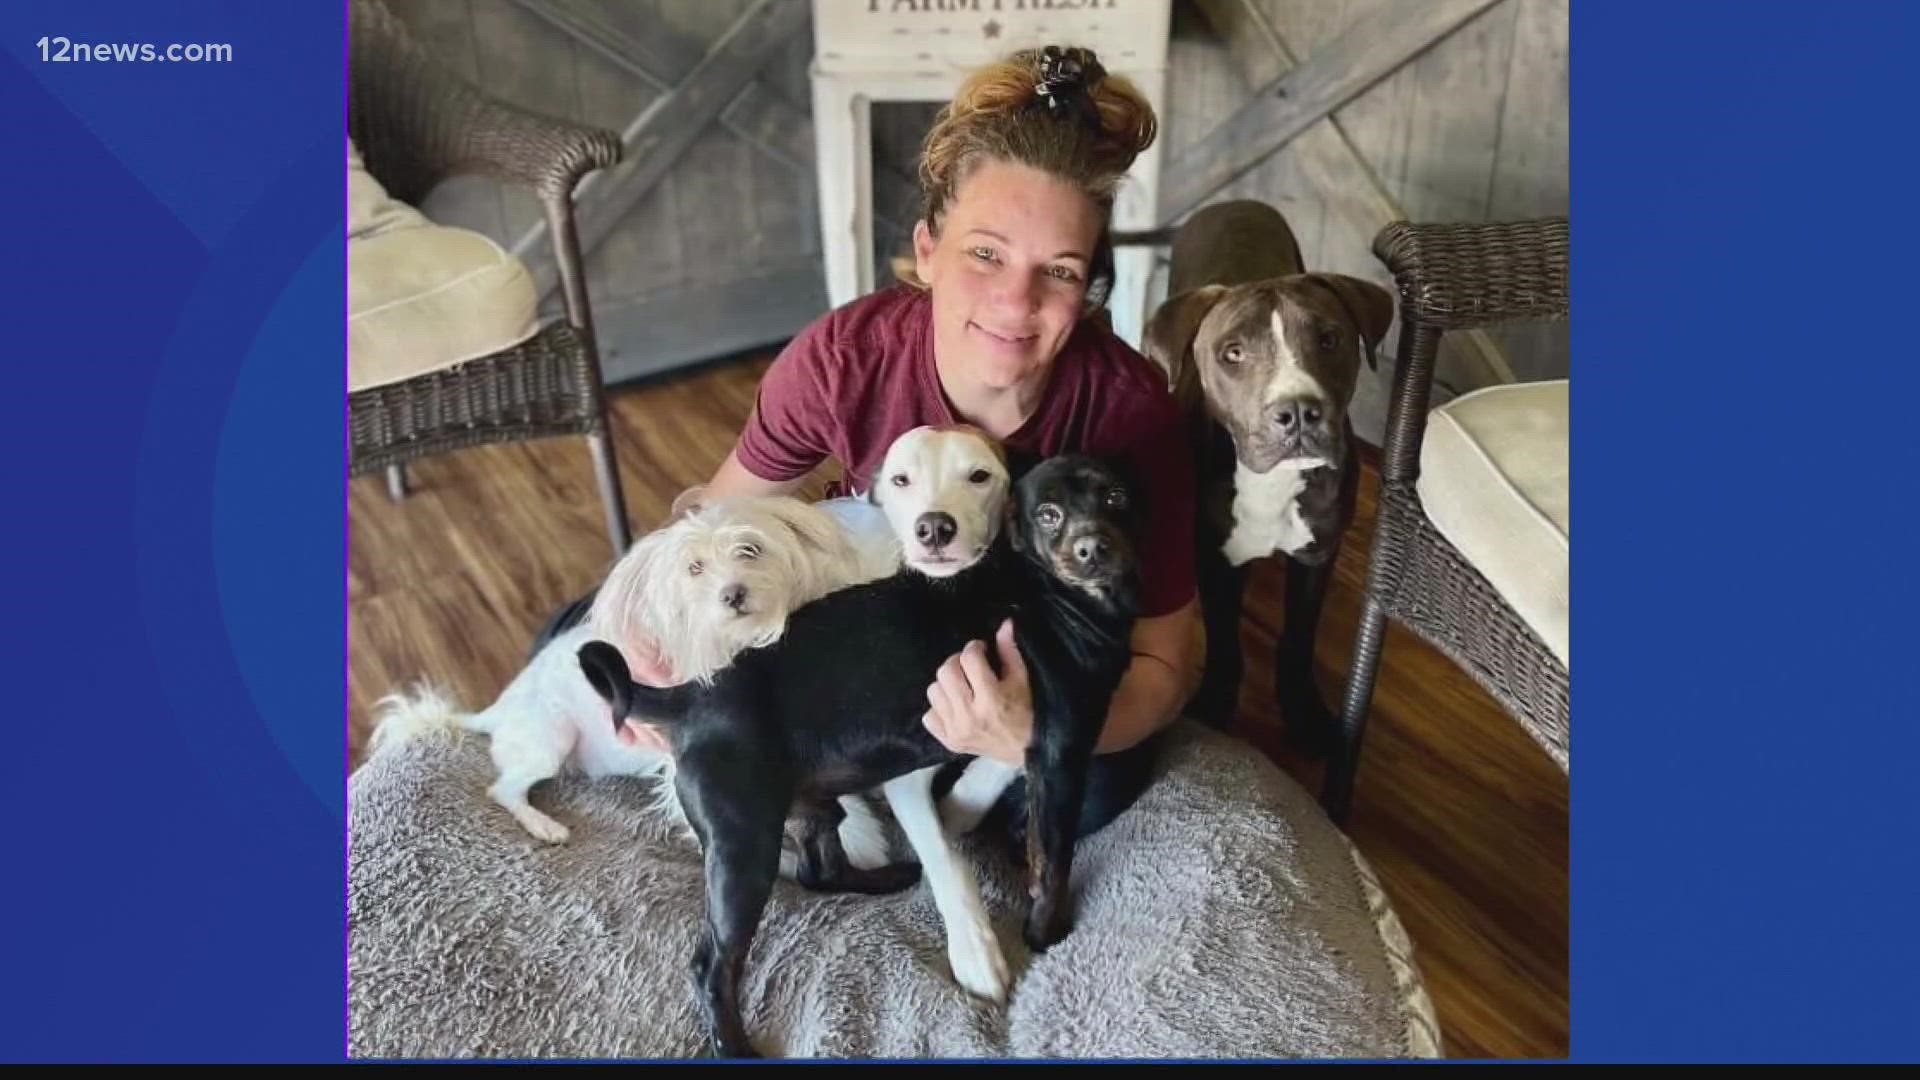 Three weeks ago 11 dogs were stolen from a Chandler home. Four of the dogs were found dumped in a Mesa dog park. The dogs were returned to their owner.